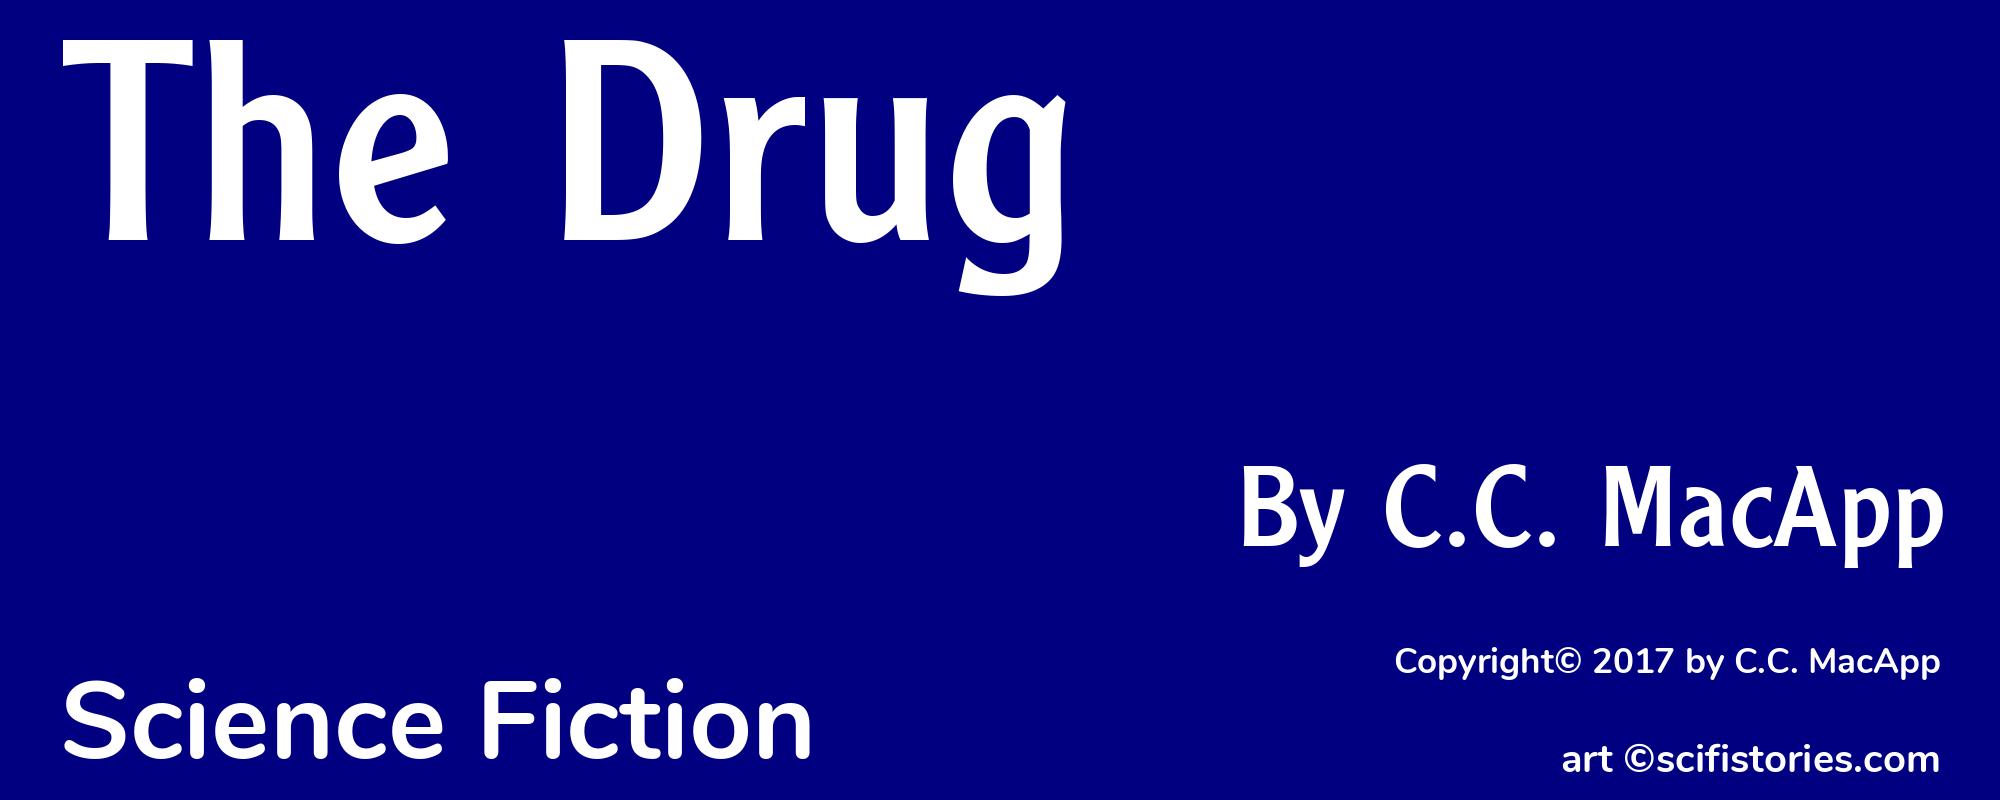 The Drug - Cover